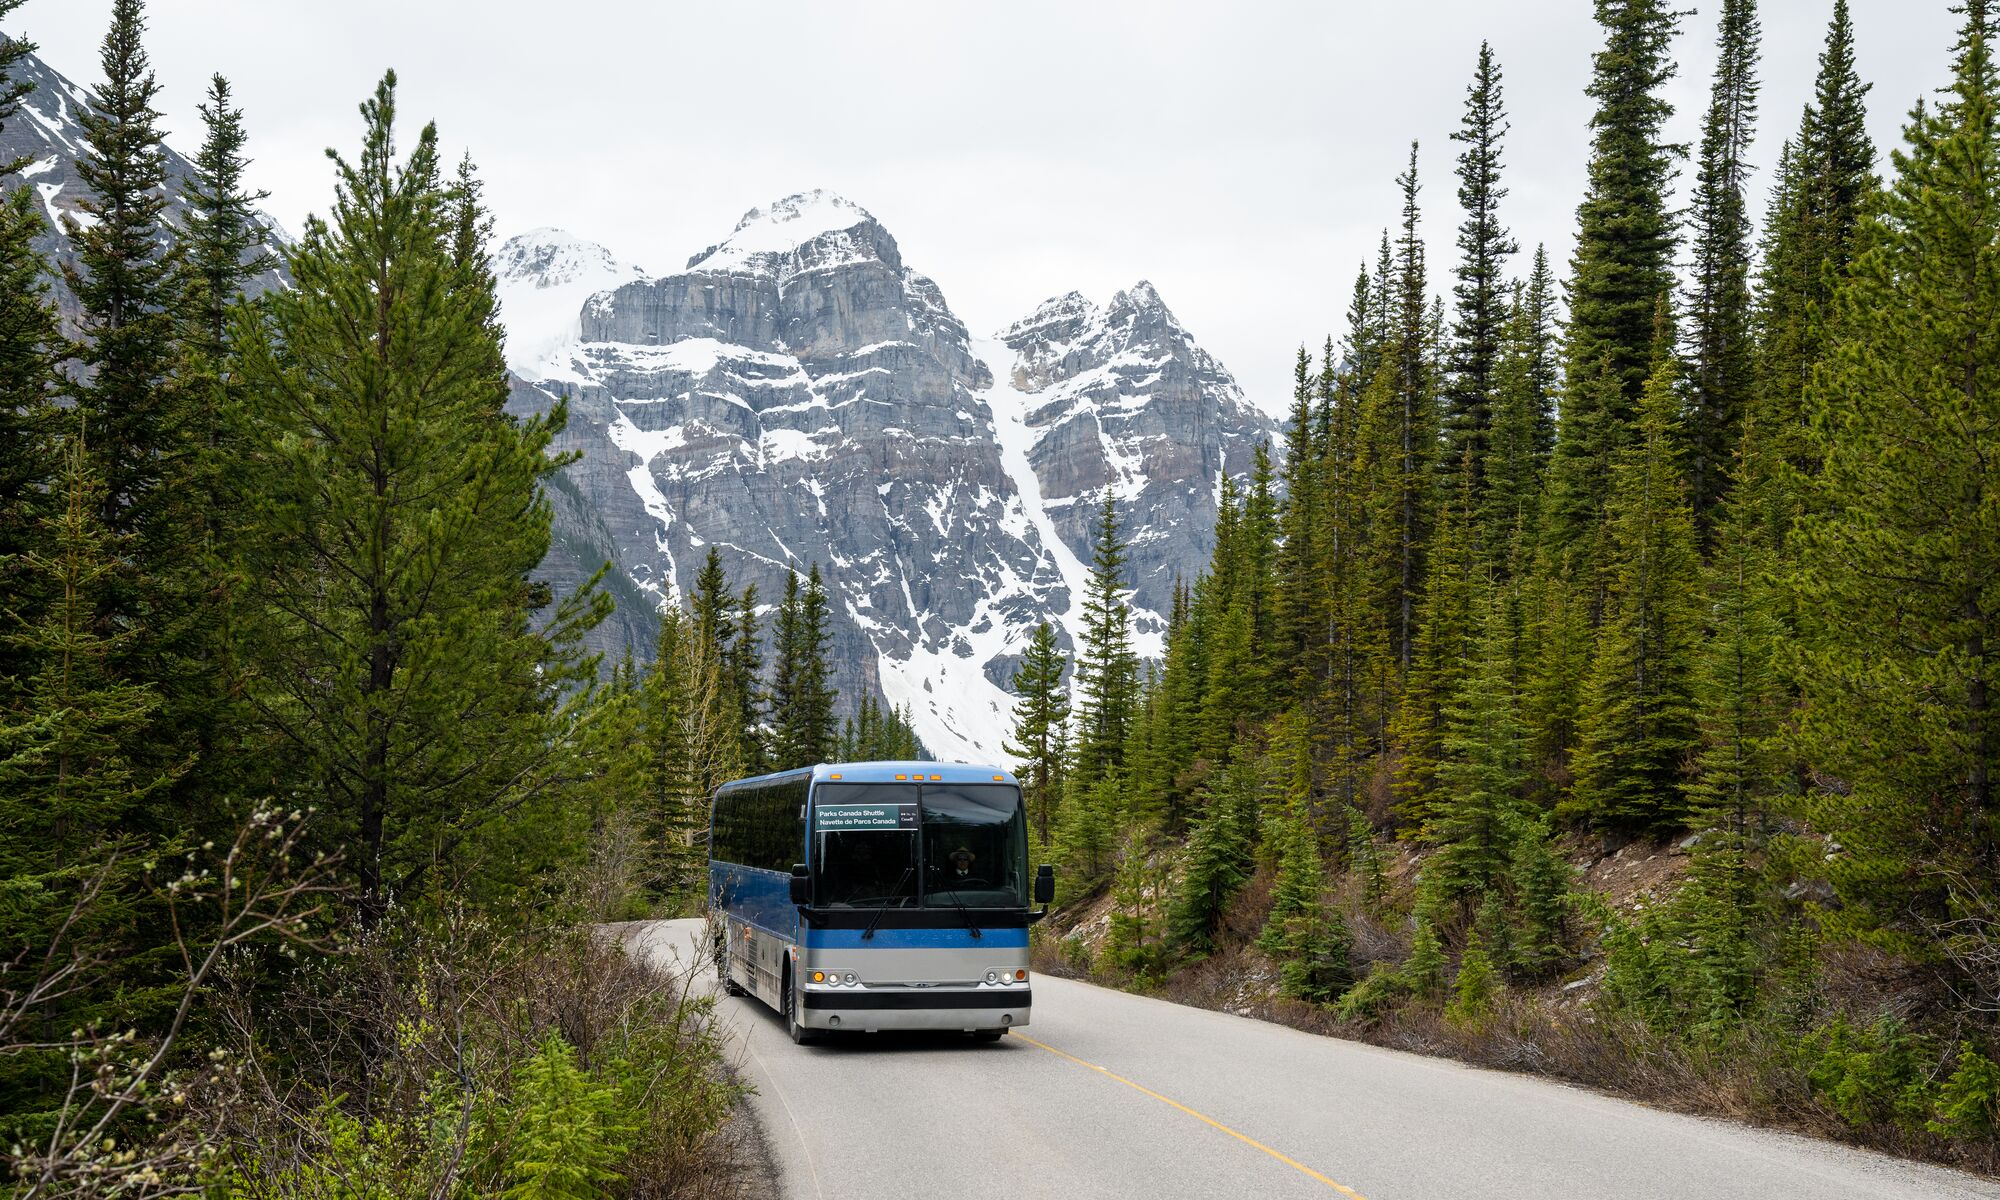 A Parks Canada shuttle drives down Moraine Lake Road, surrounded by evergreen trees with a view of the Valley of the Ten Peaks behind it near Lake Louise in Banff National Park.